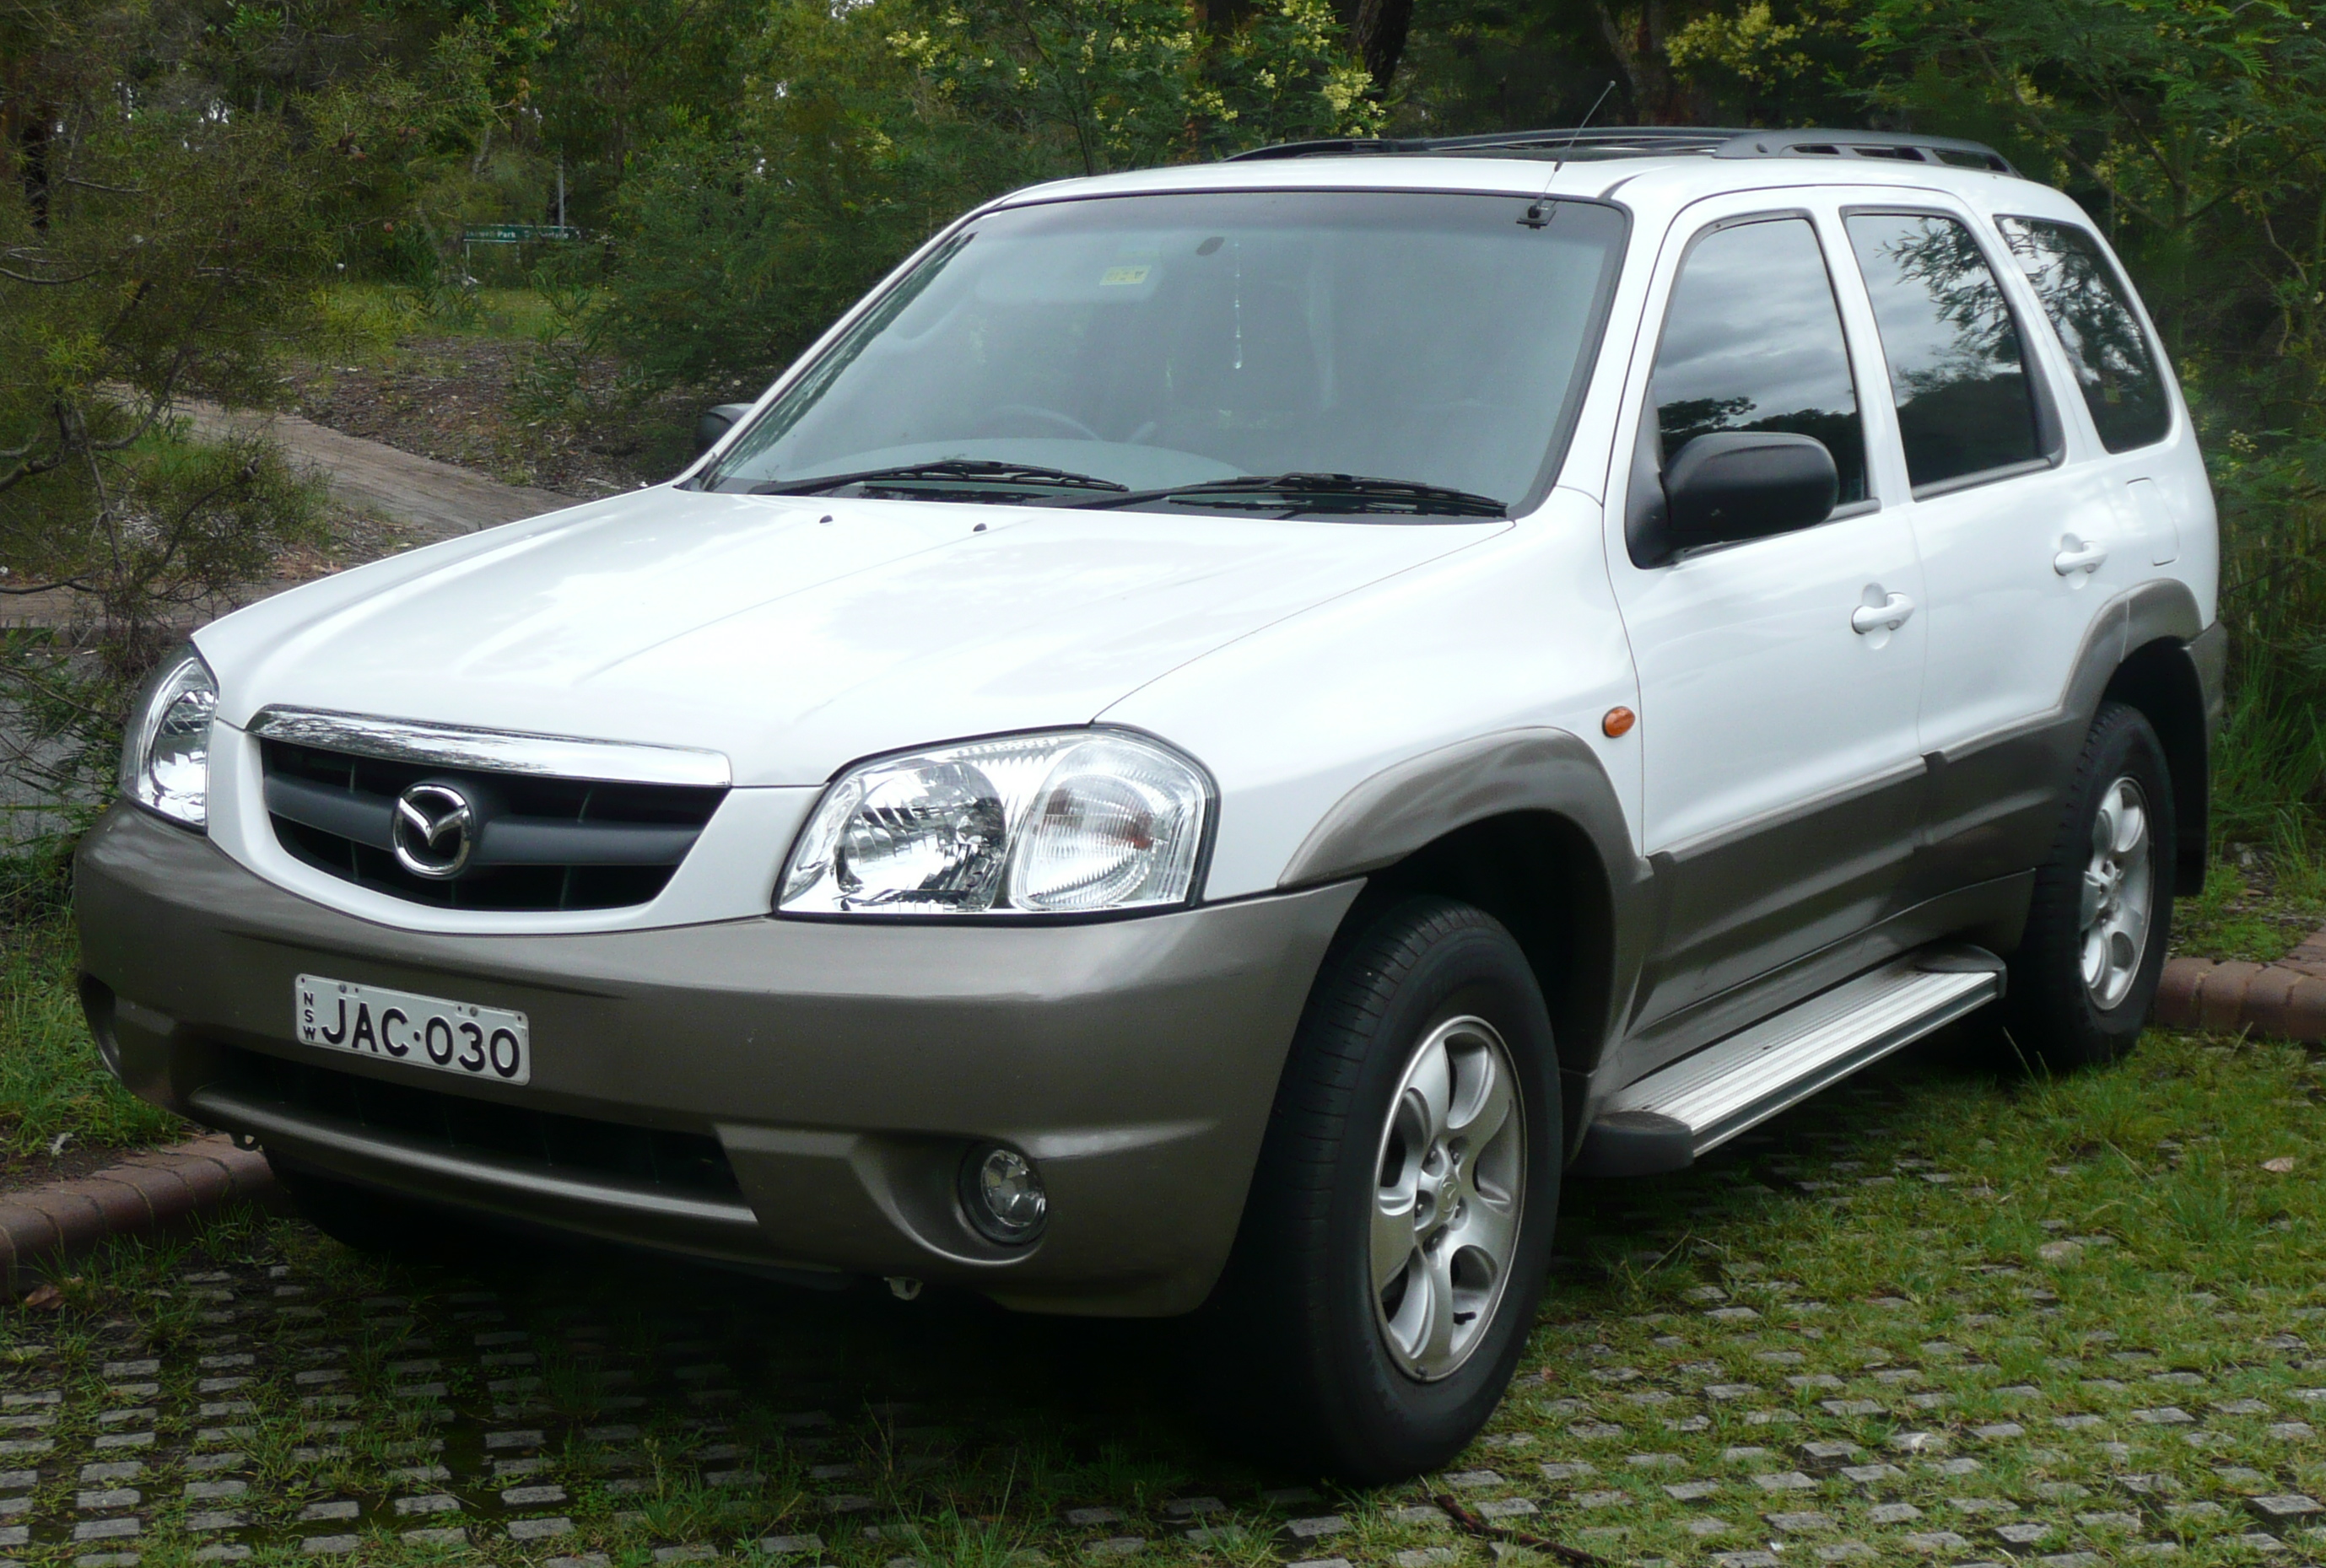 Mazda 4x4 2001: Review, Amazing Pictures and Images - Look at the car